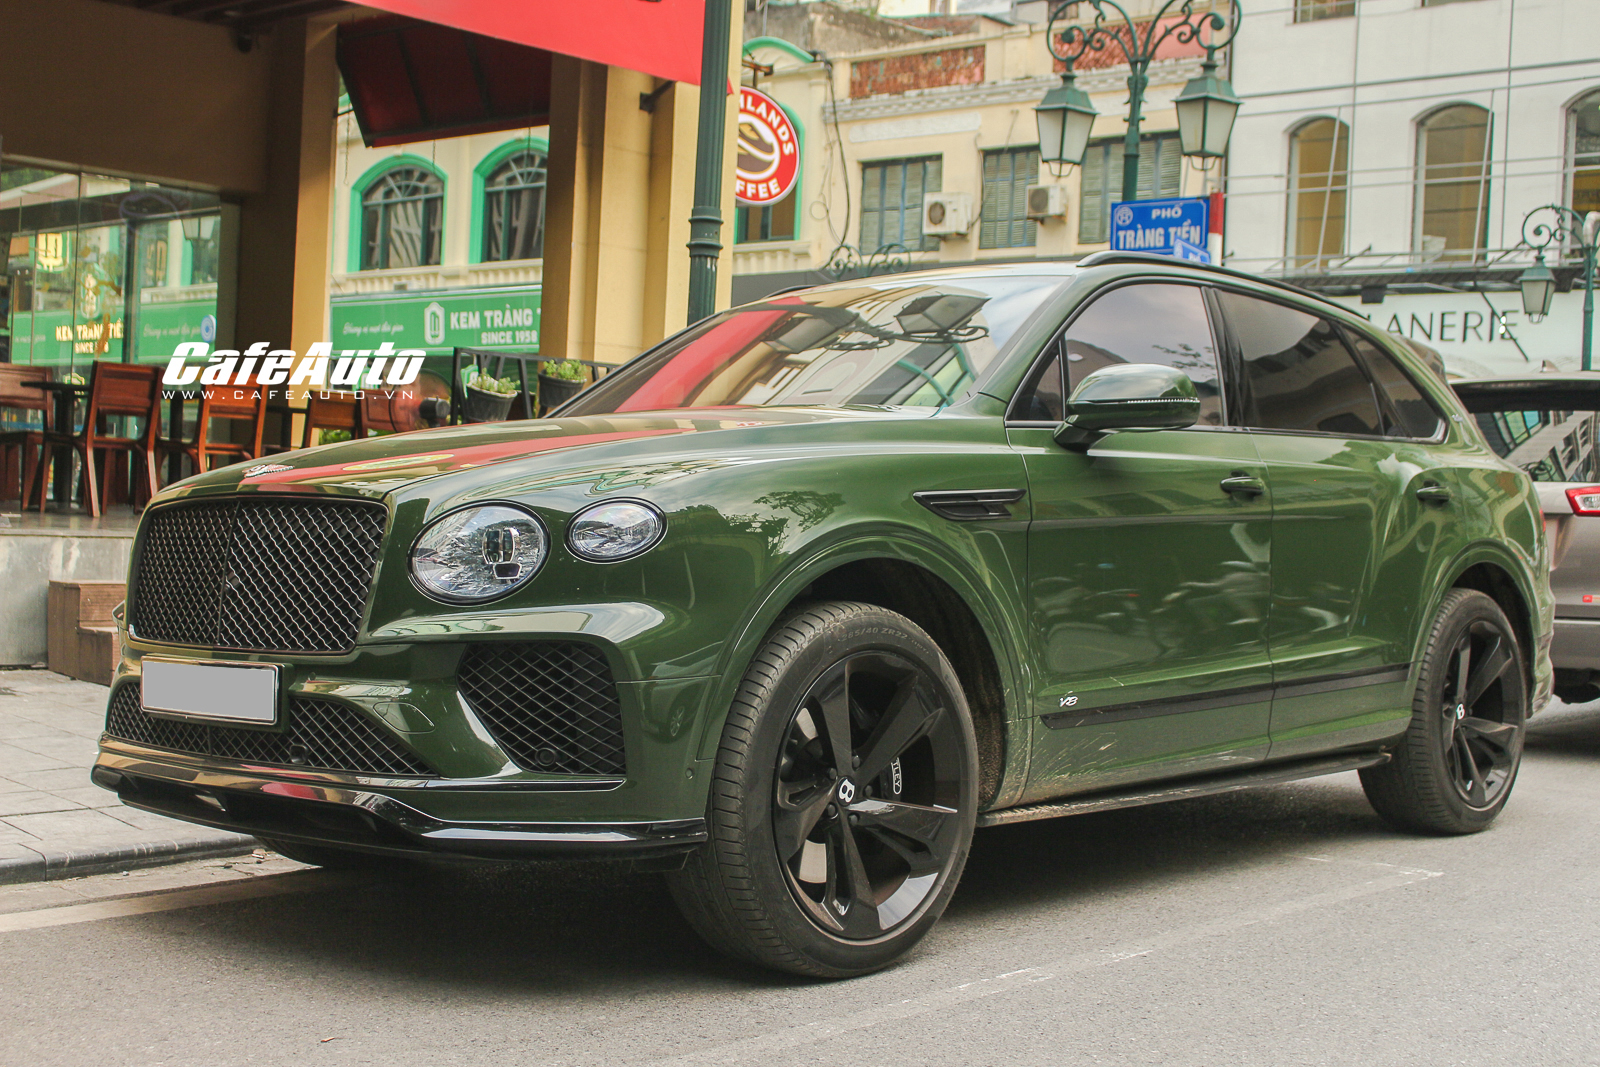 doanh-so-bentley-2021-dat-ky-luc-cafeautovn-10